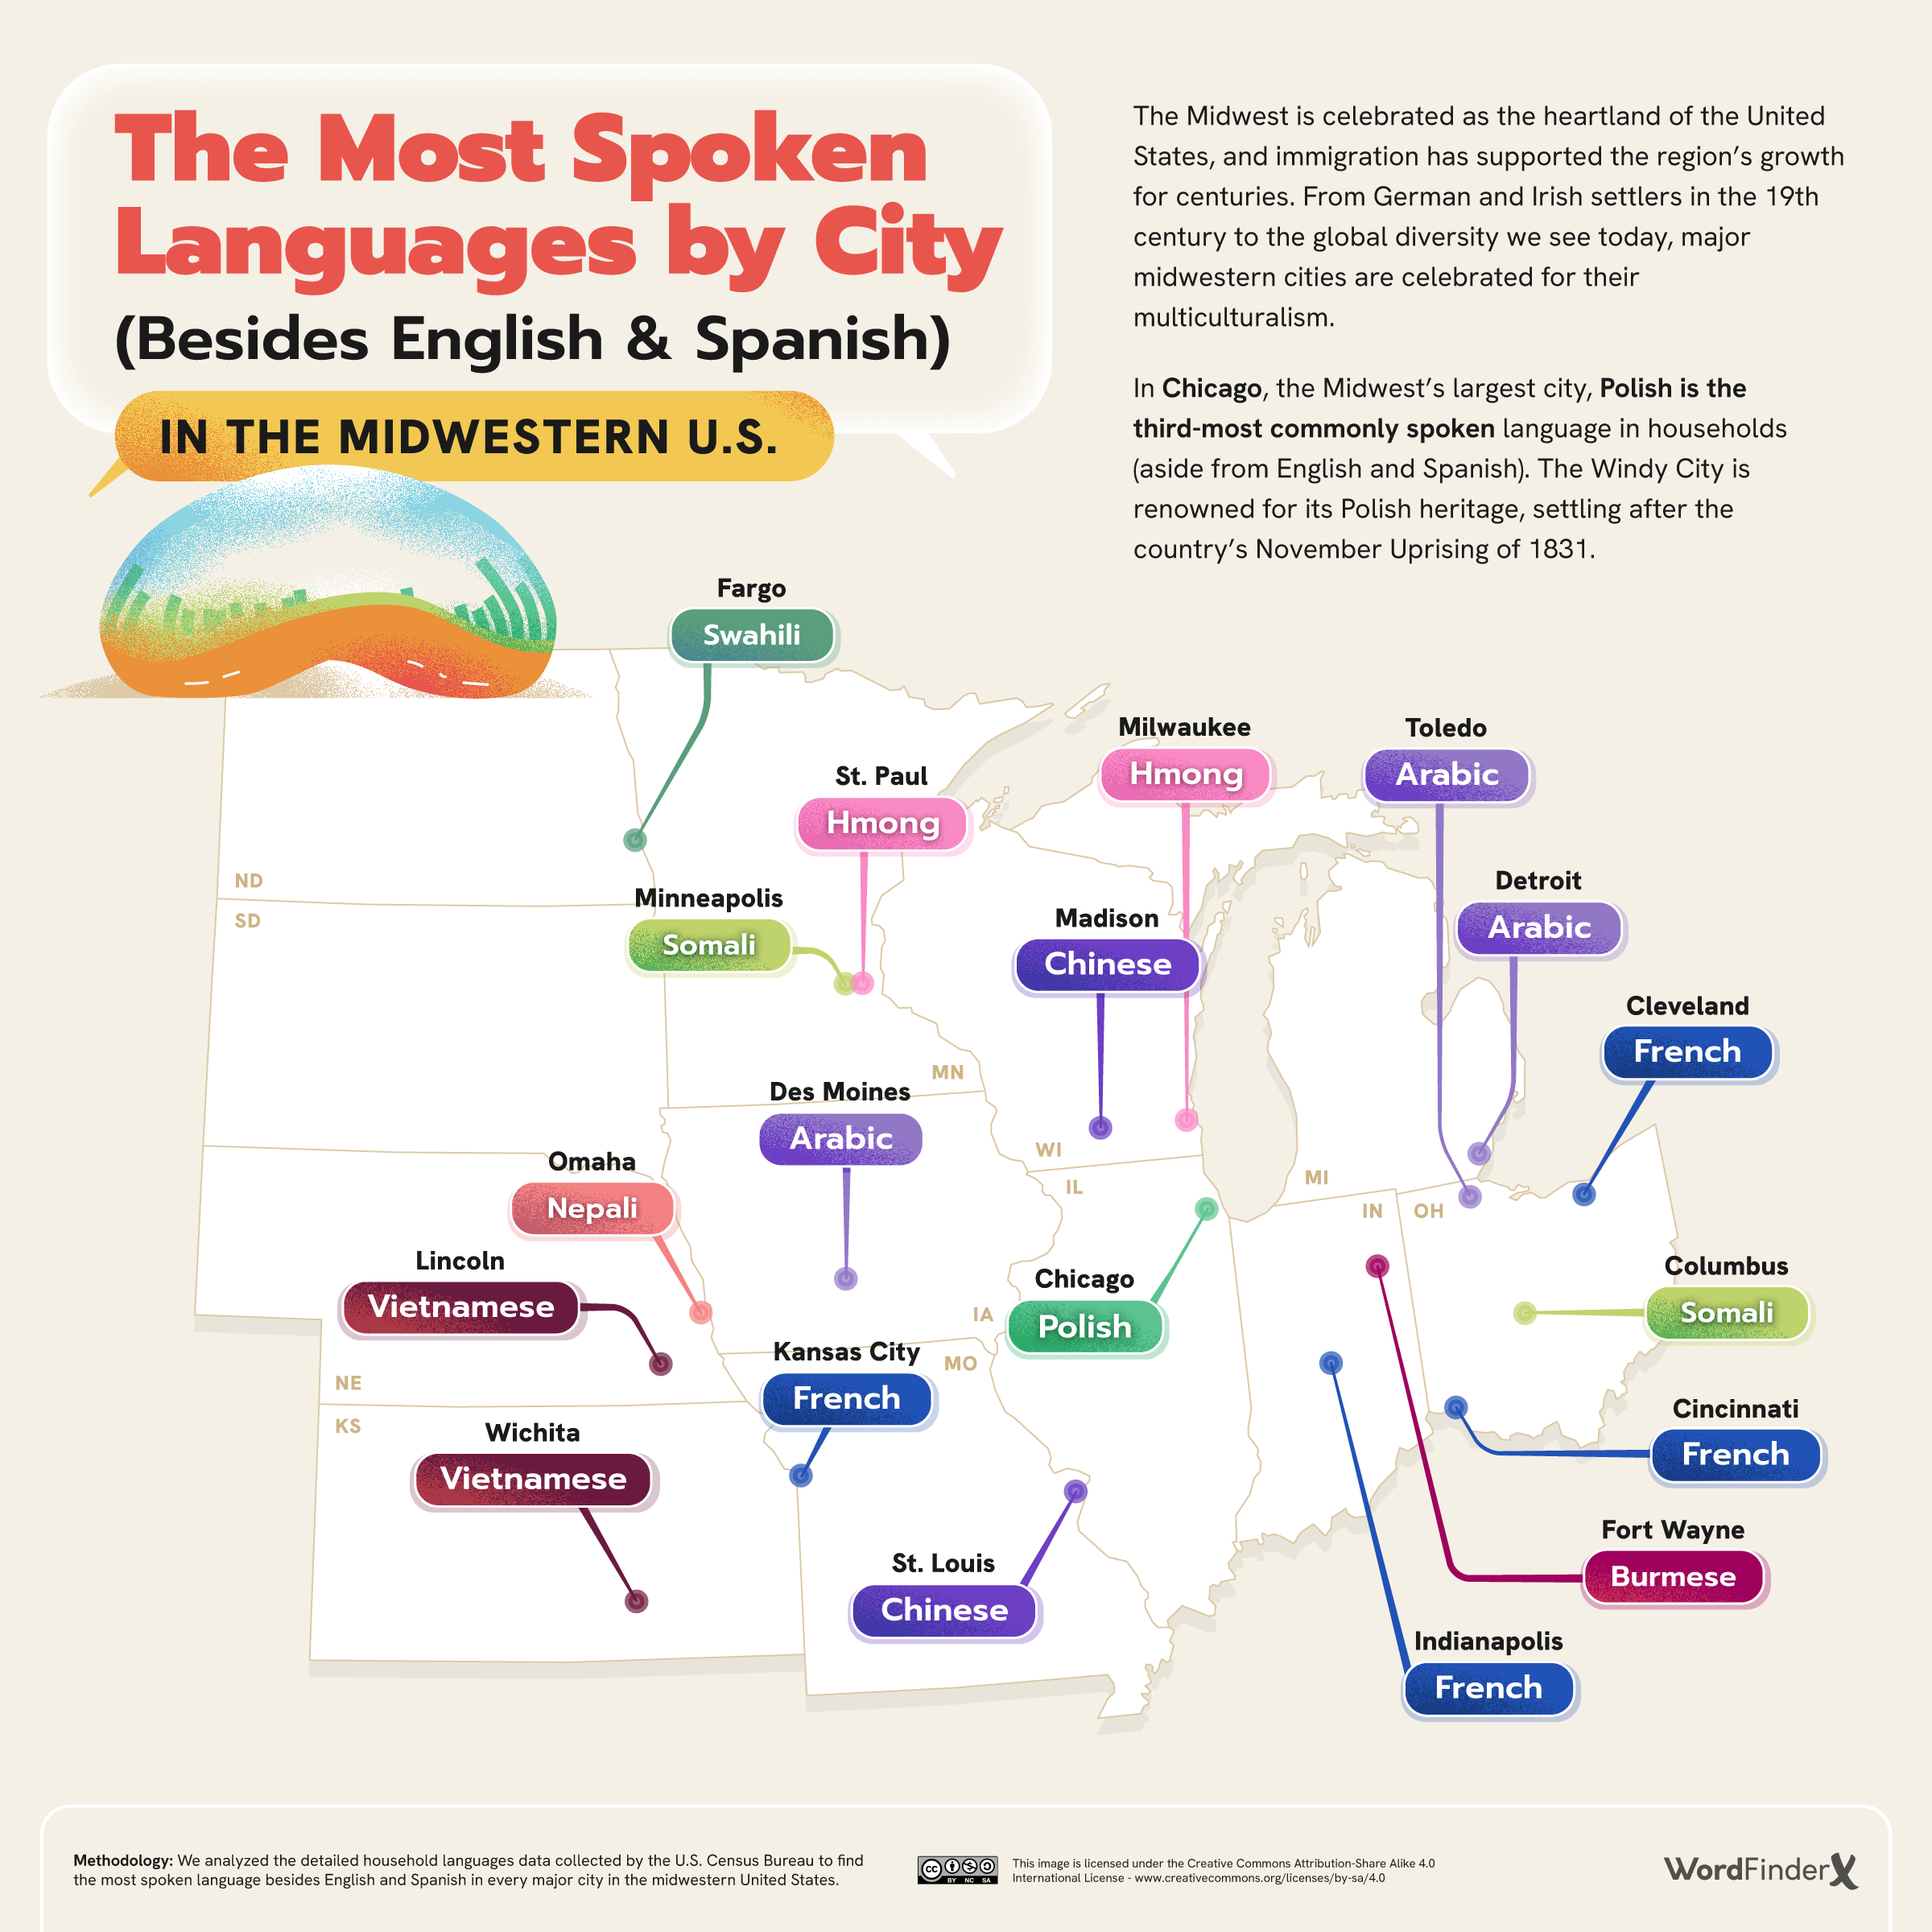 The-Most-Spoken-Languages-by-City-Besides-English-Spanish-in-the-Midwestern-US